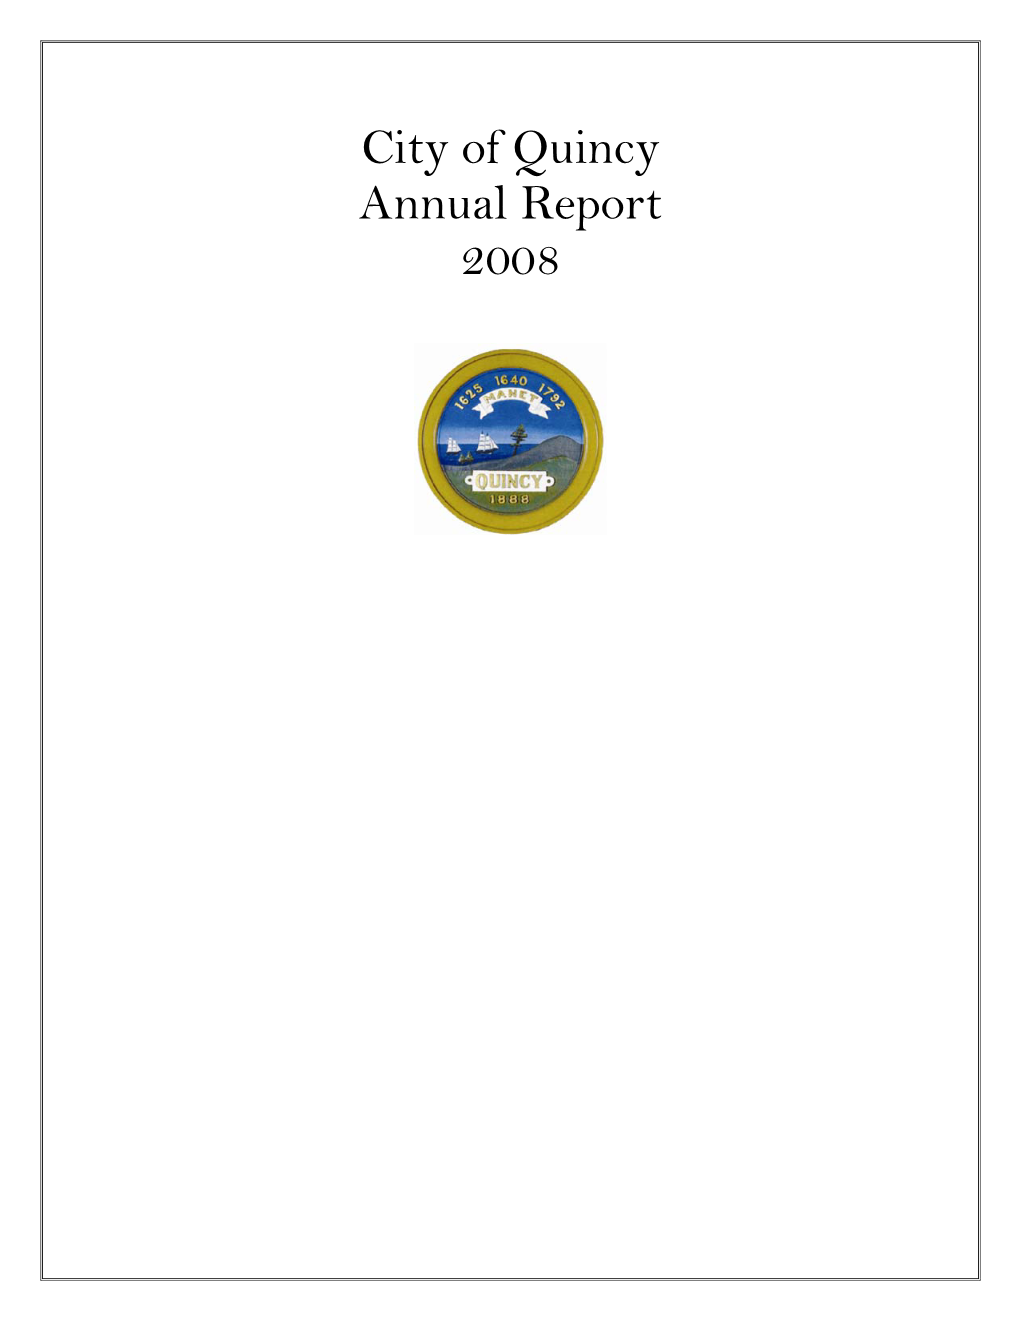 City of Quincy Annual Report 2008